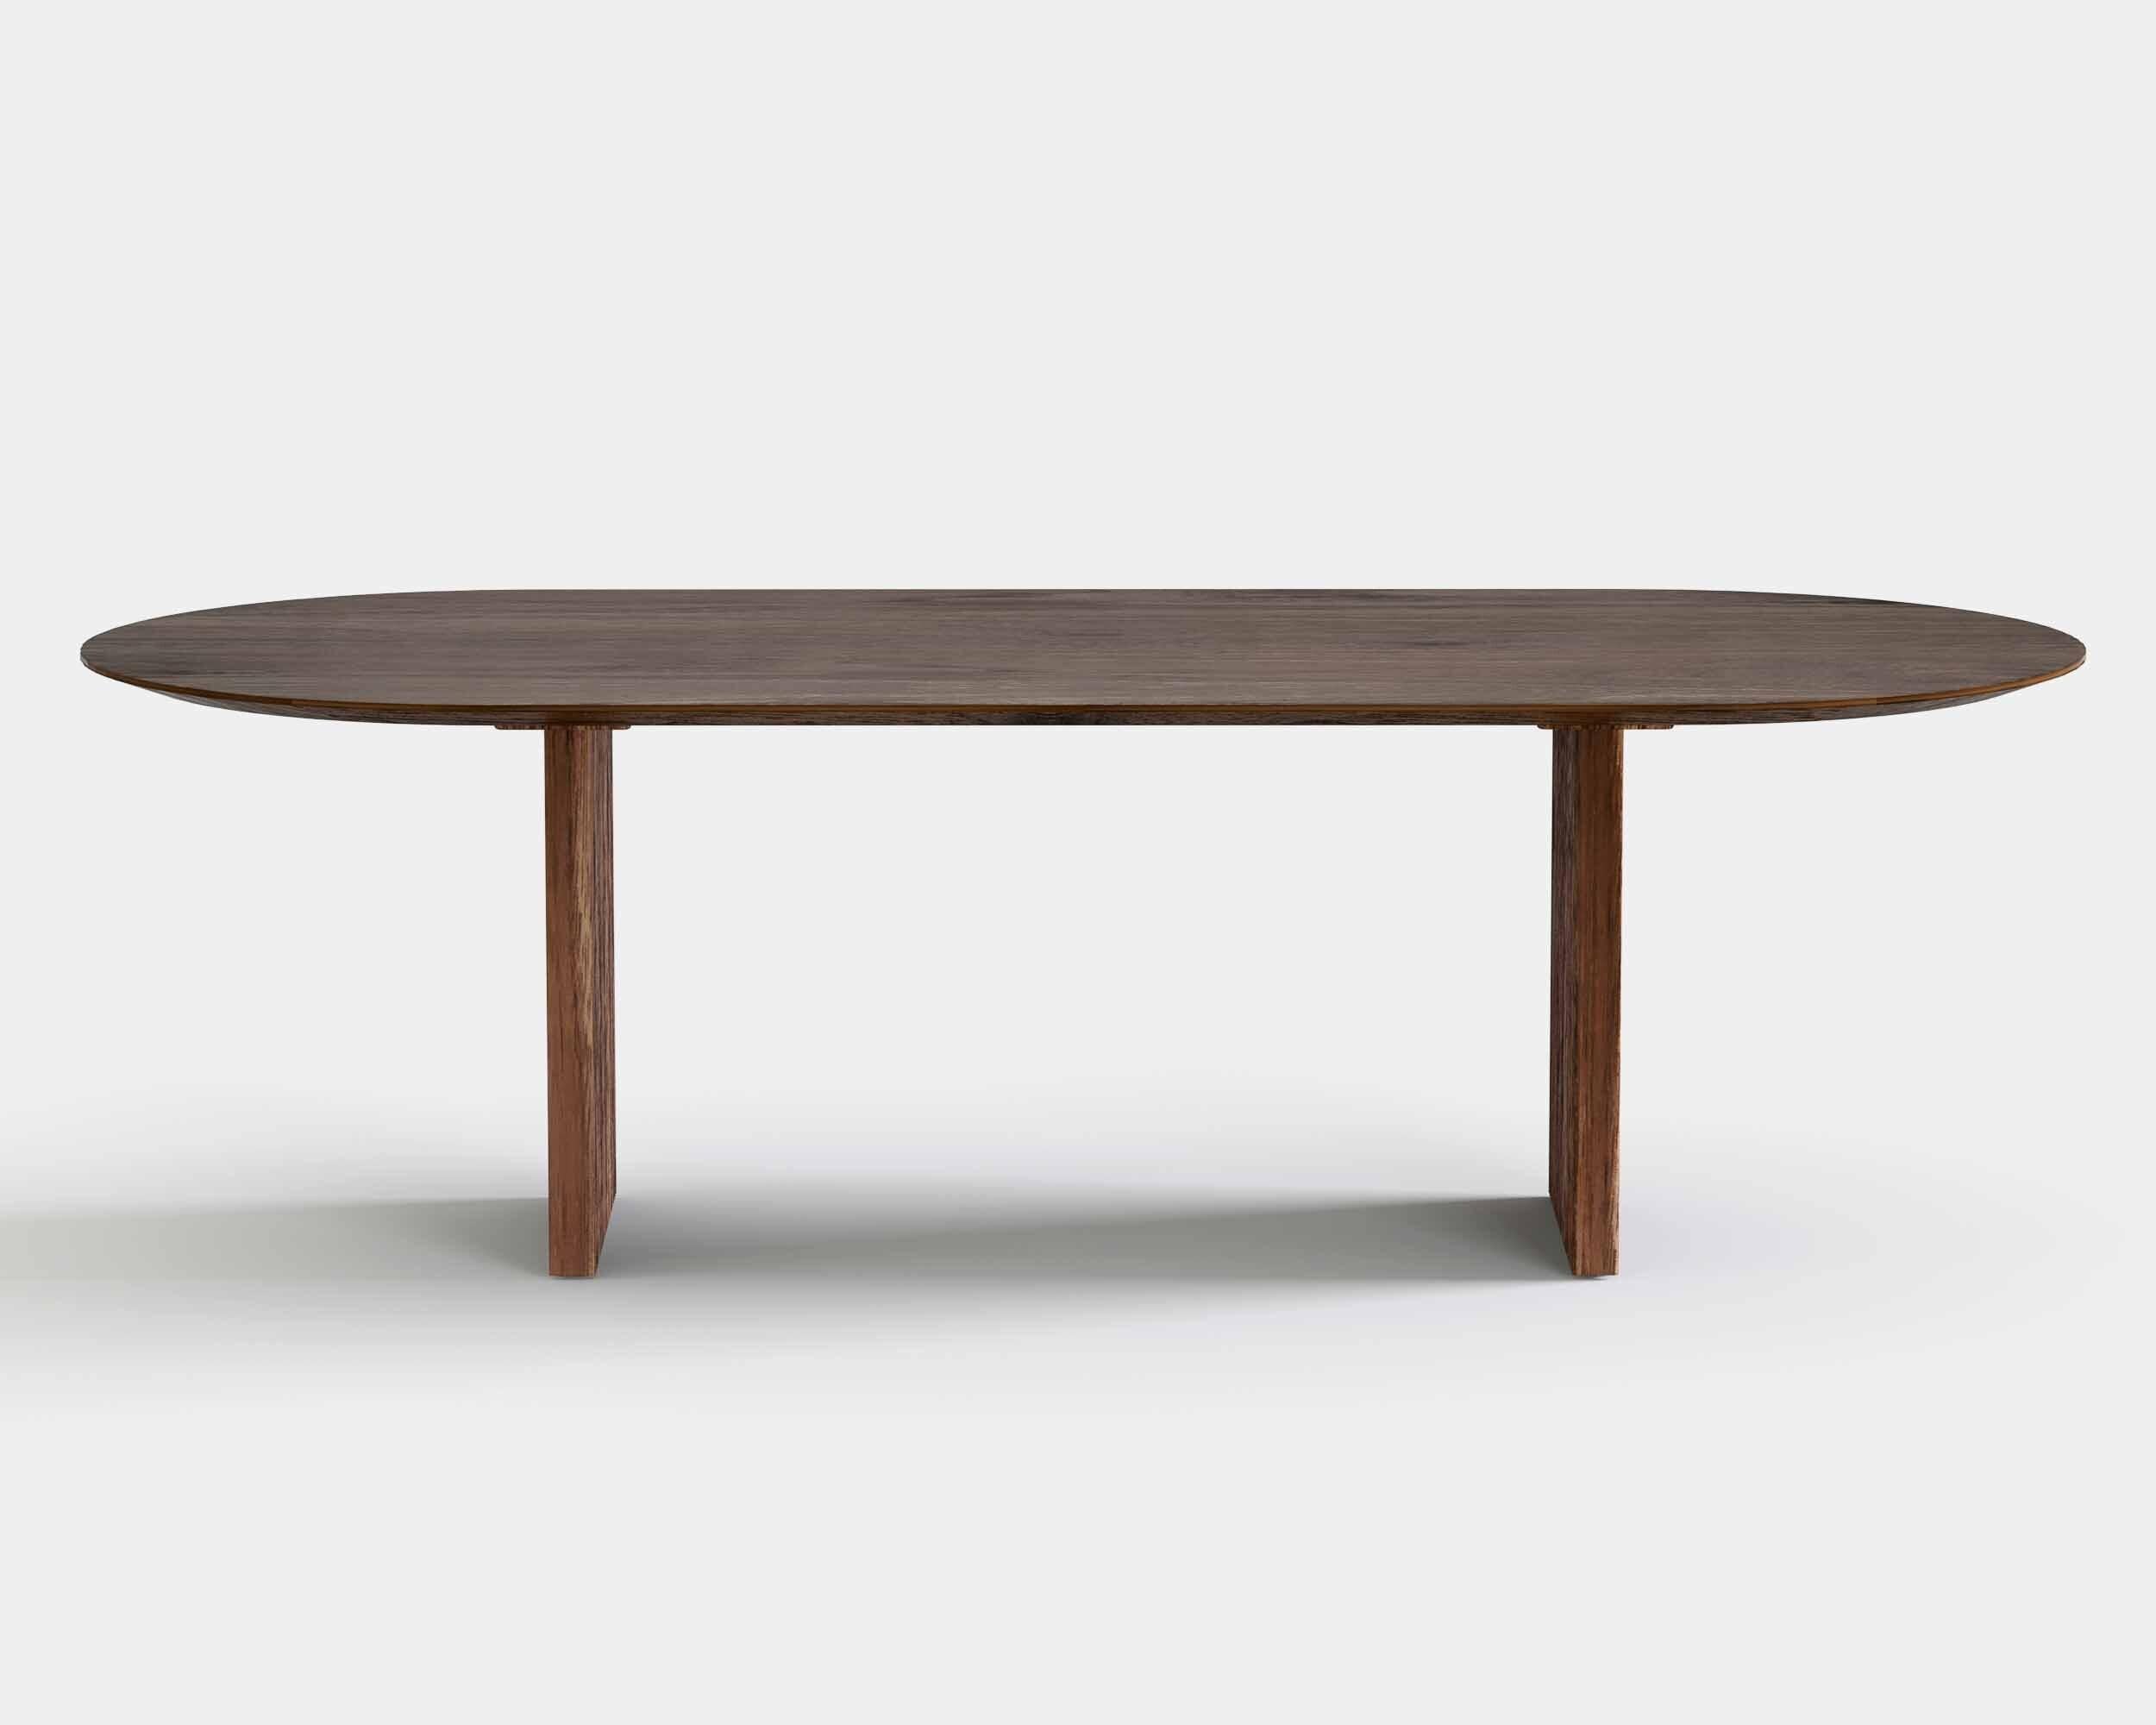 Ten dining table, oval, 340 cm.
Solid wood table top and legs. Handmade in Denmark. 

Measures: Height: 72 or 74 cm

Table top dimensions:
– 200 x 95 cm
– 240 x 105 cm
– 270 x 105 cm
– 300 x 105 cm
– 340 x 105 cm
– 370 x 105 cm
– 400 x